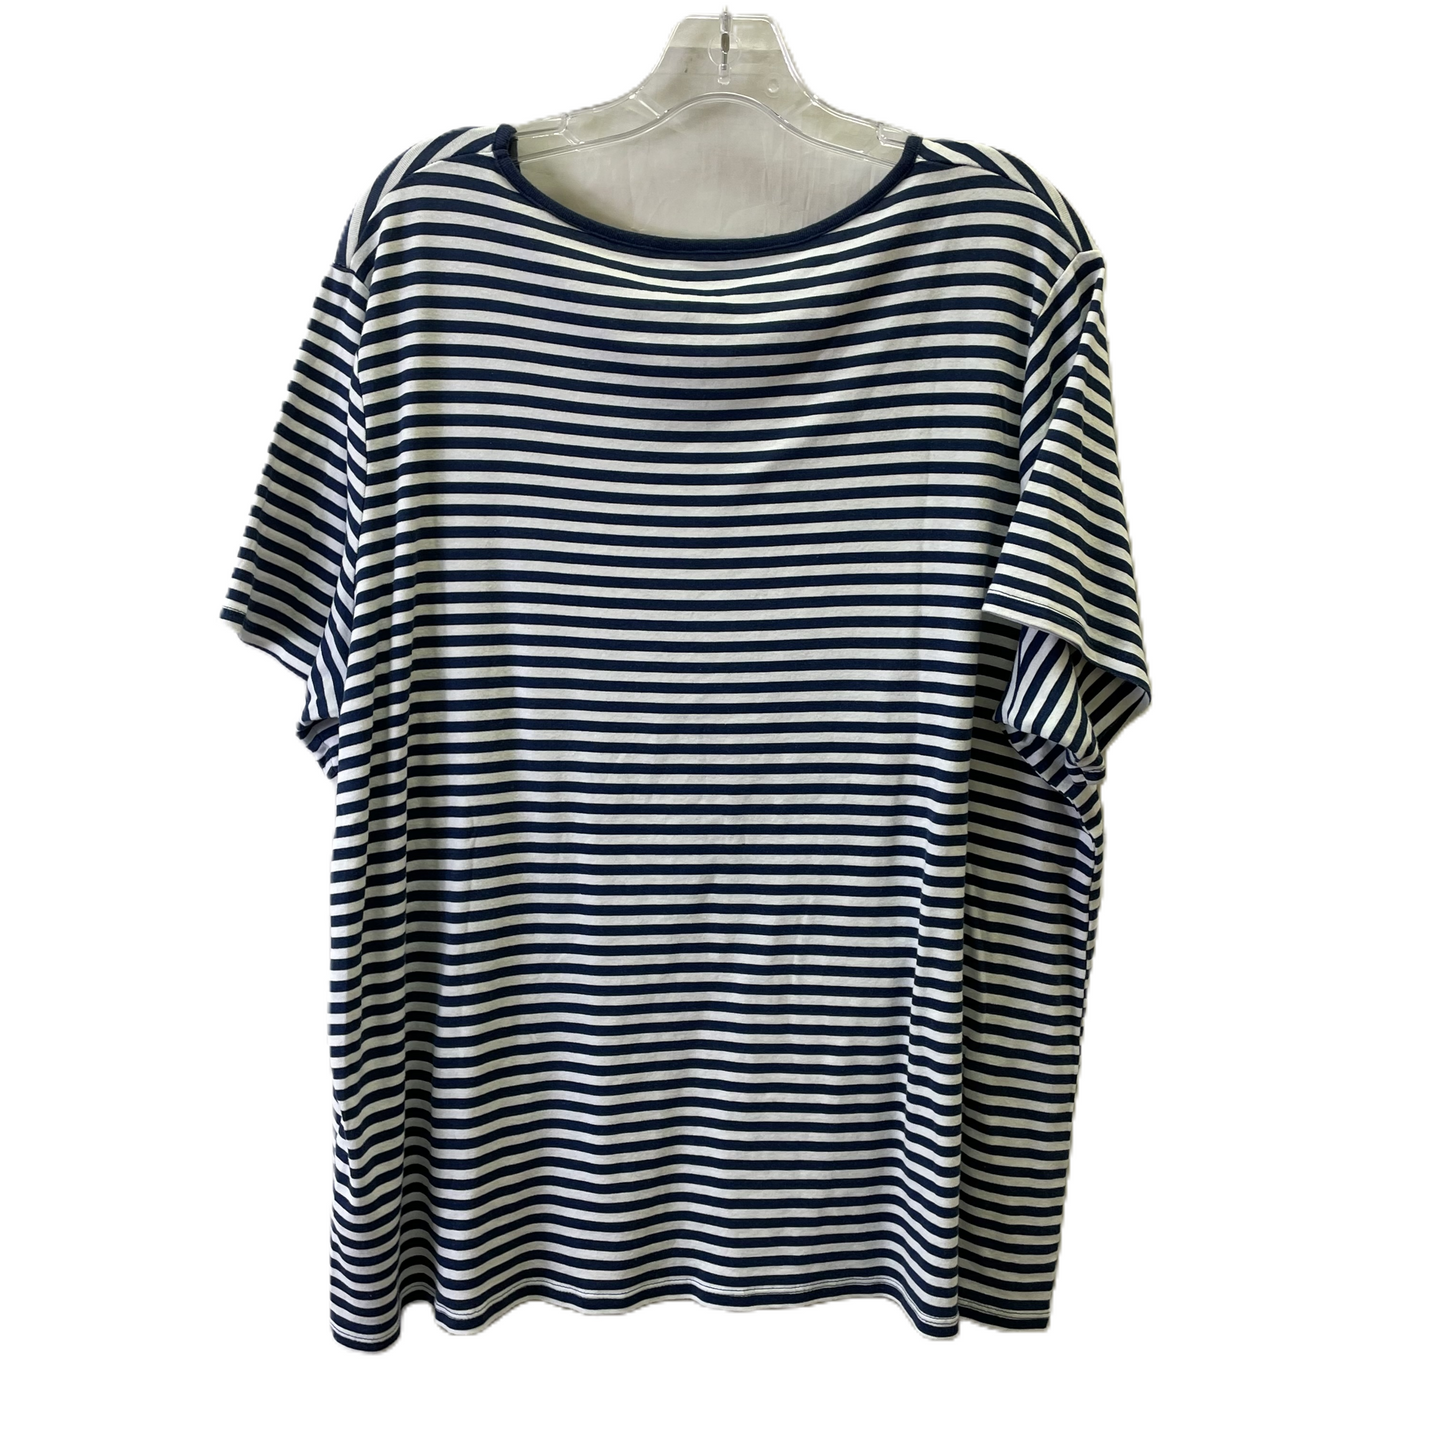 Navy Top Short Sleeve Basic By Croft And Barrow, Size: 2x